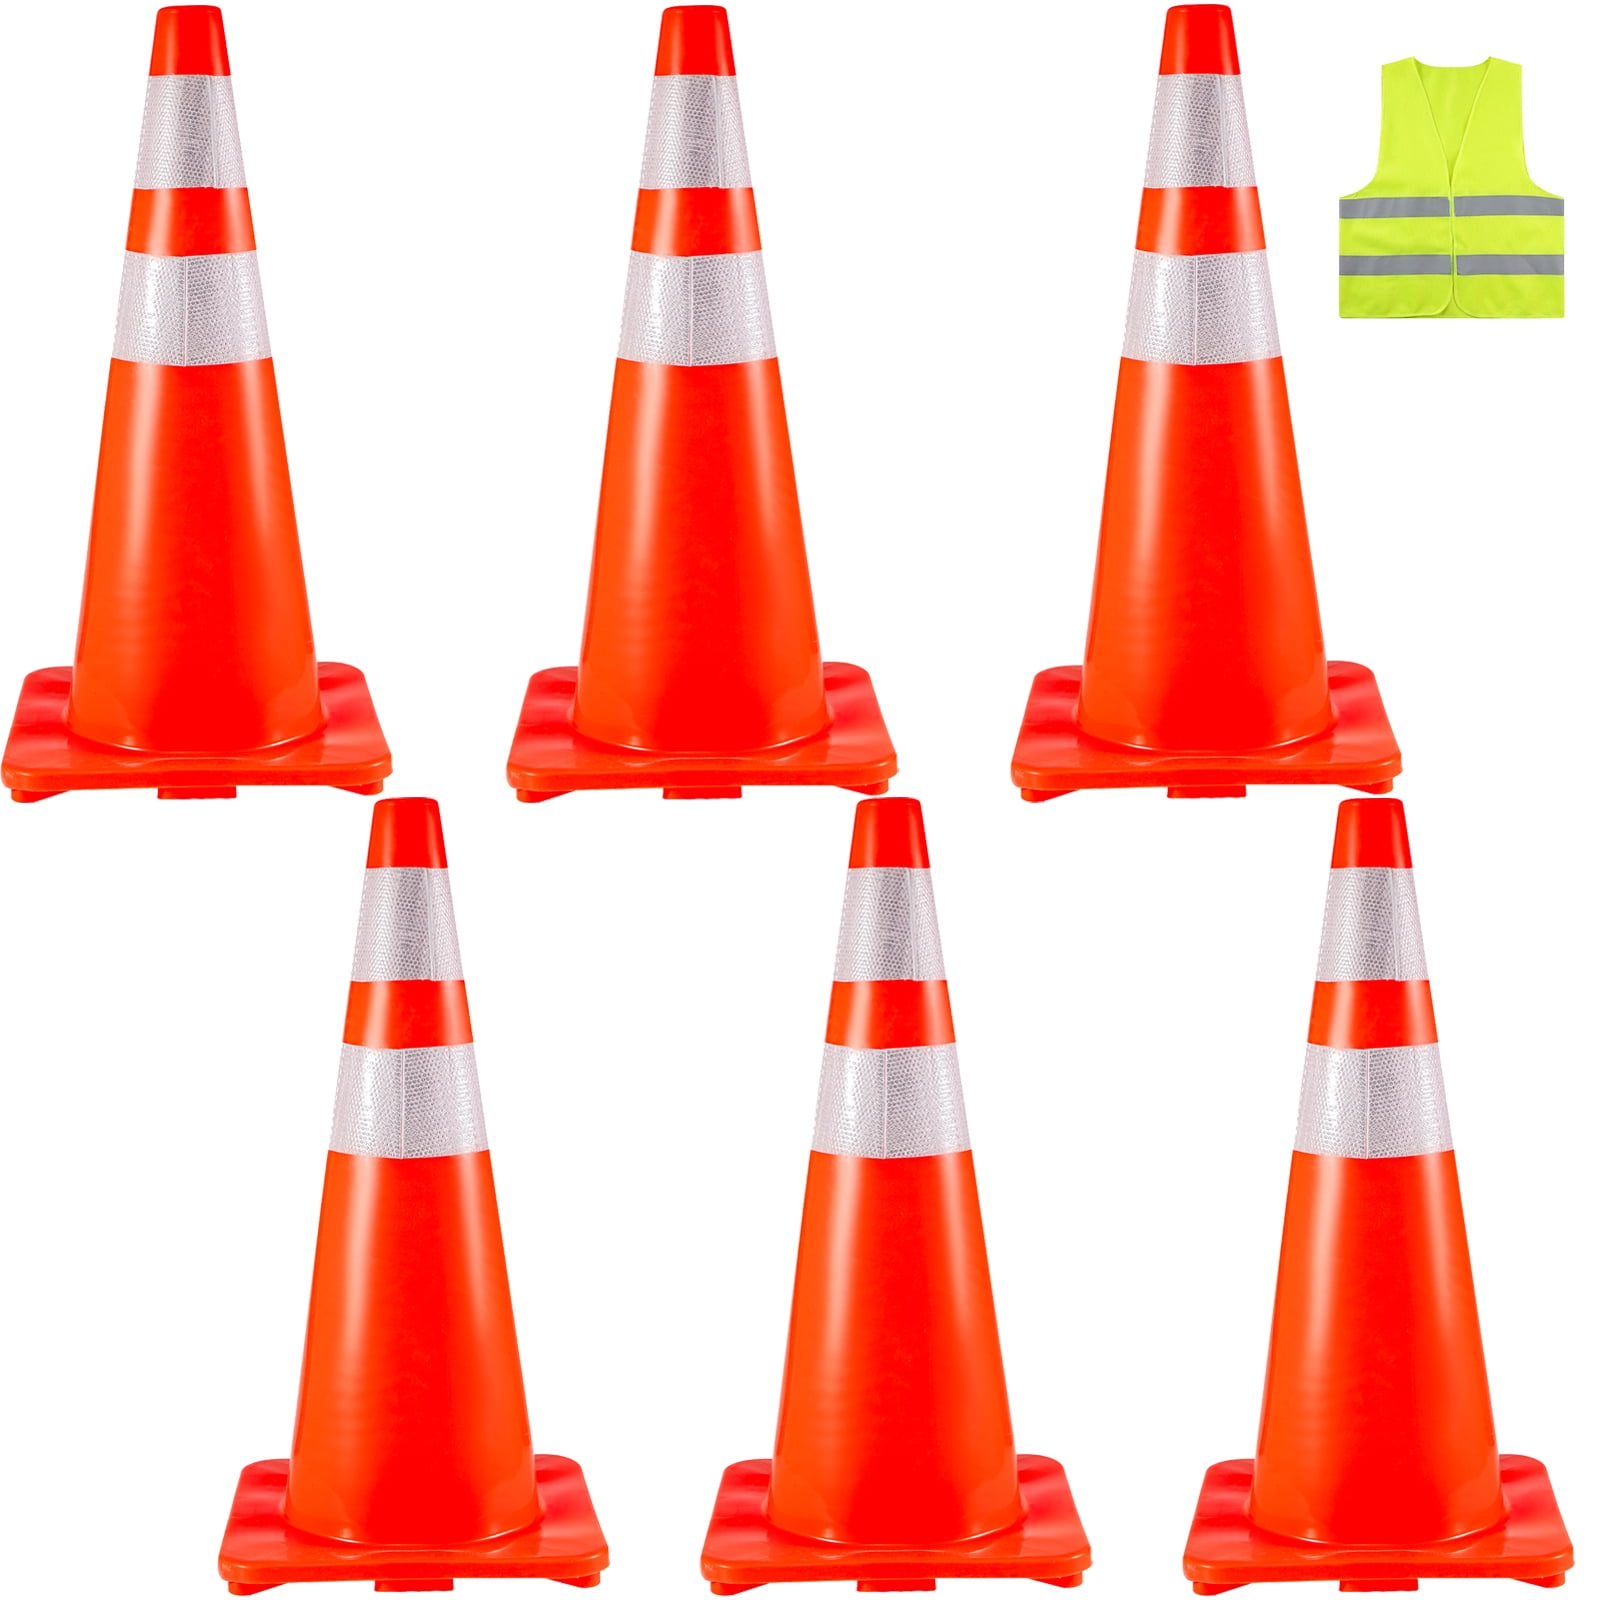 28" PVC Traffic Cones With Safety Road Reflective Collar 10 Pack Orange & Black 